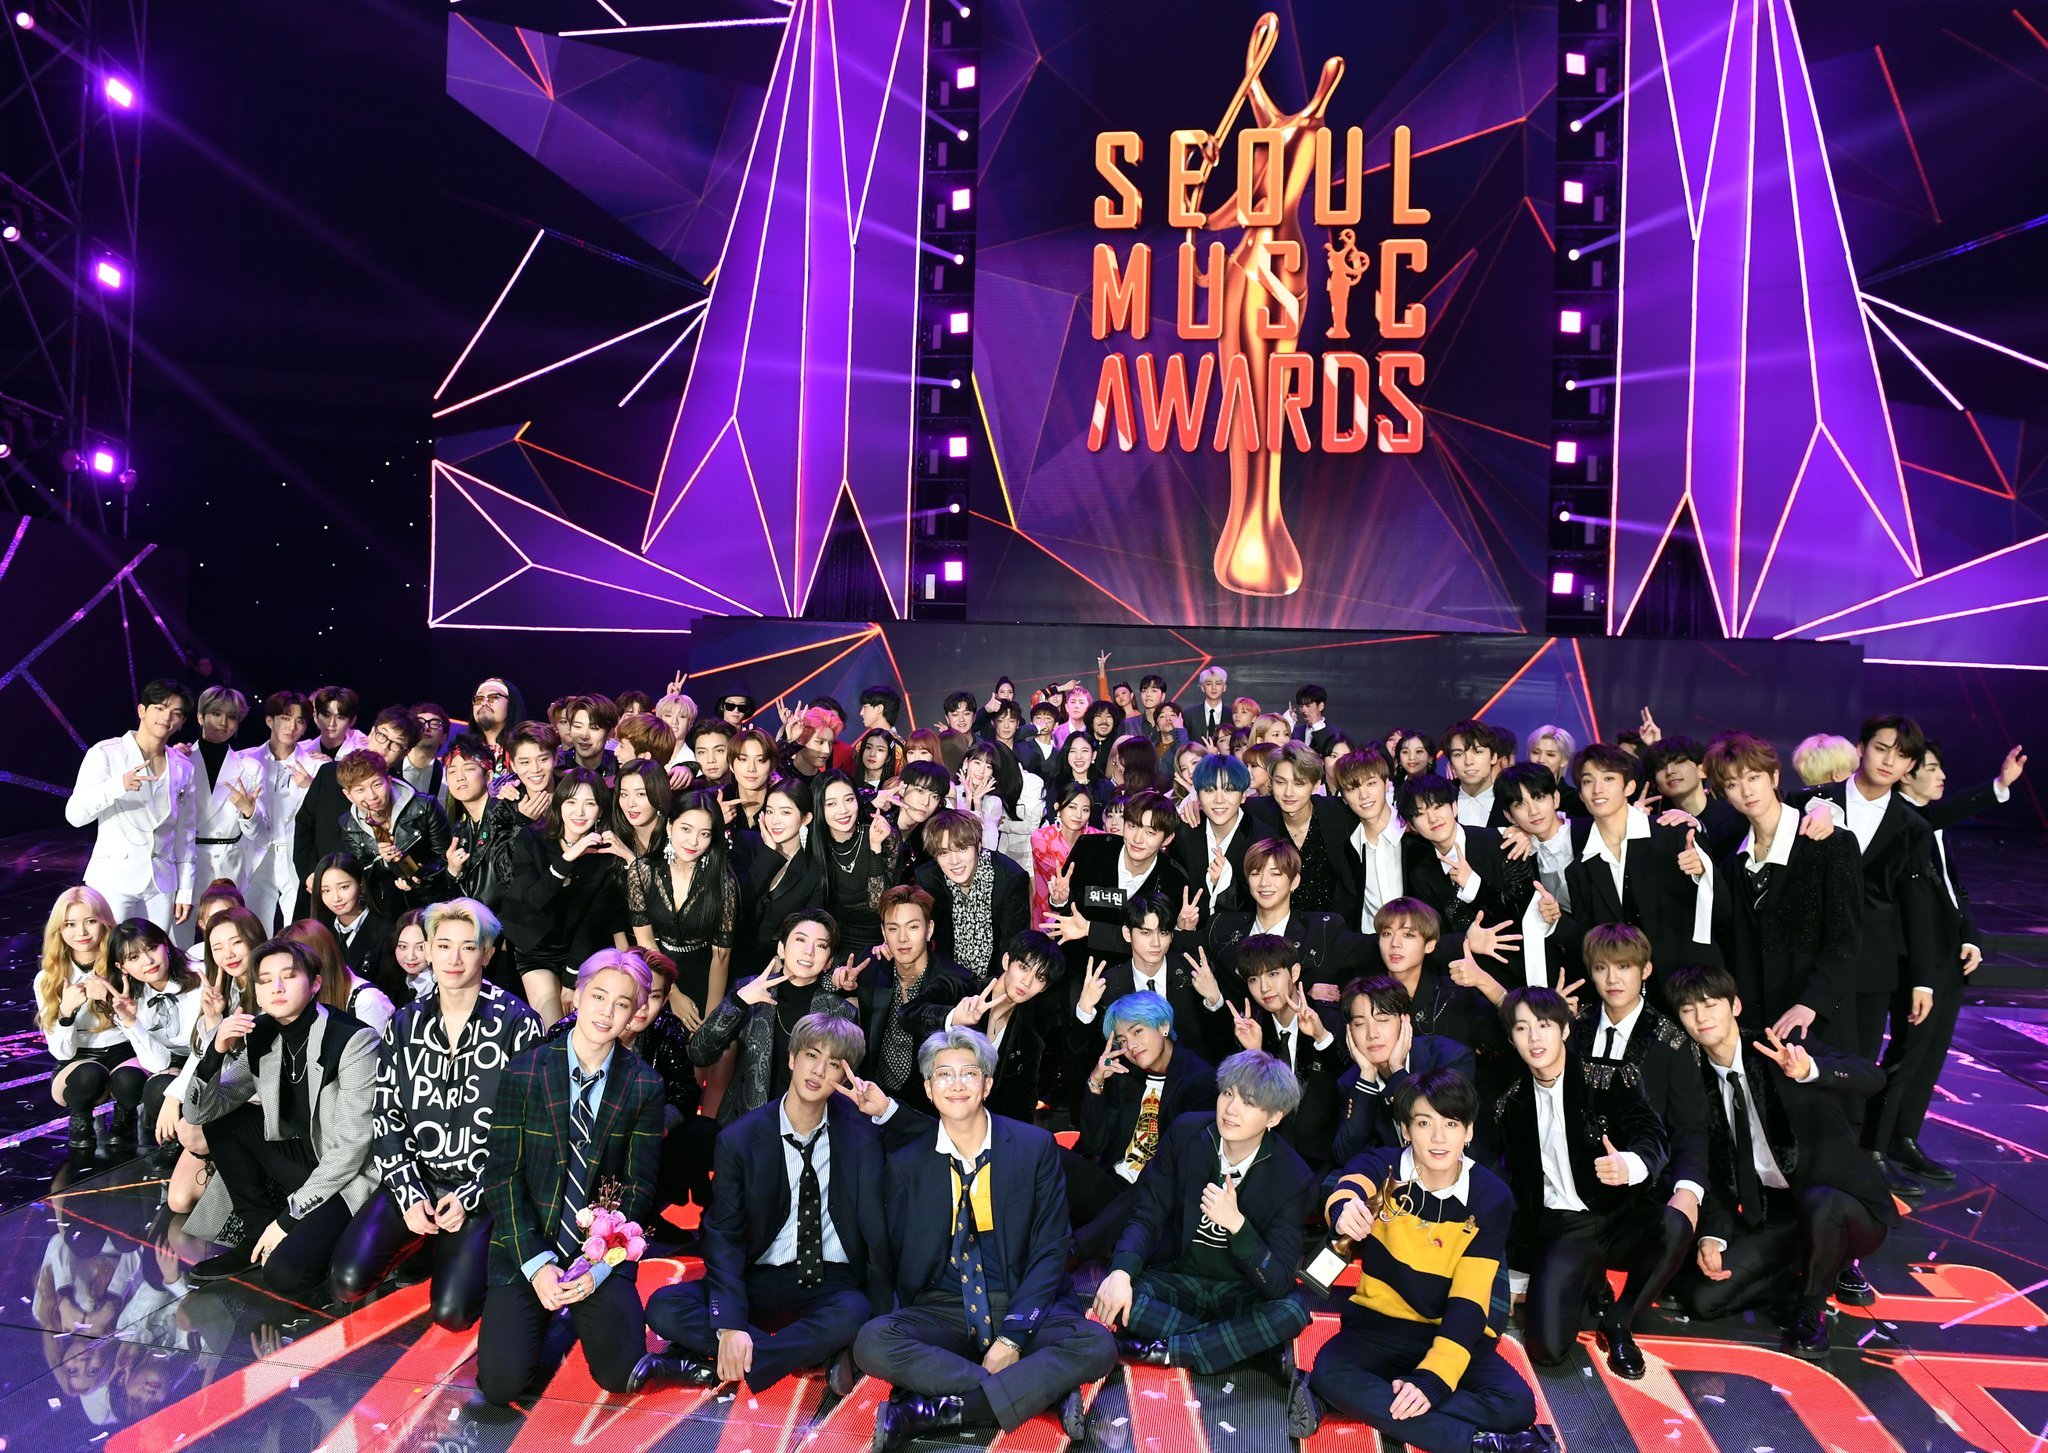 Jayelle_Kdiamond💎 on Twitter: "[서울가요대상] Seoul Music Awards SMA group photo  after the show #SMA #BTS @BTS_twt https://t.co/gpWgs80itS" / X